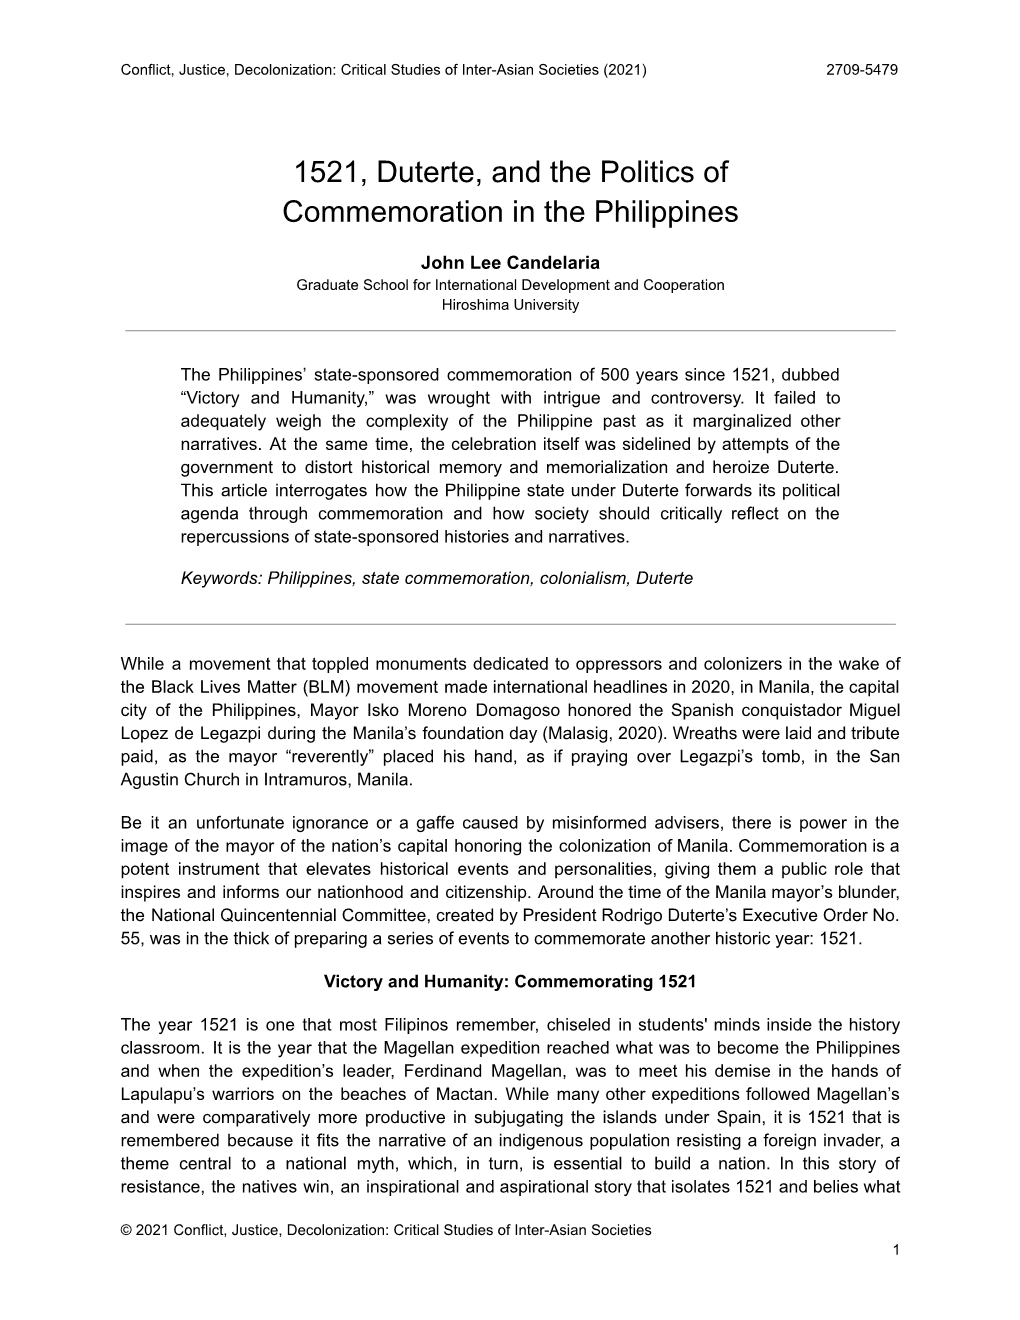 1521, Duterte, and the Politics of Commemoration in the Philippines